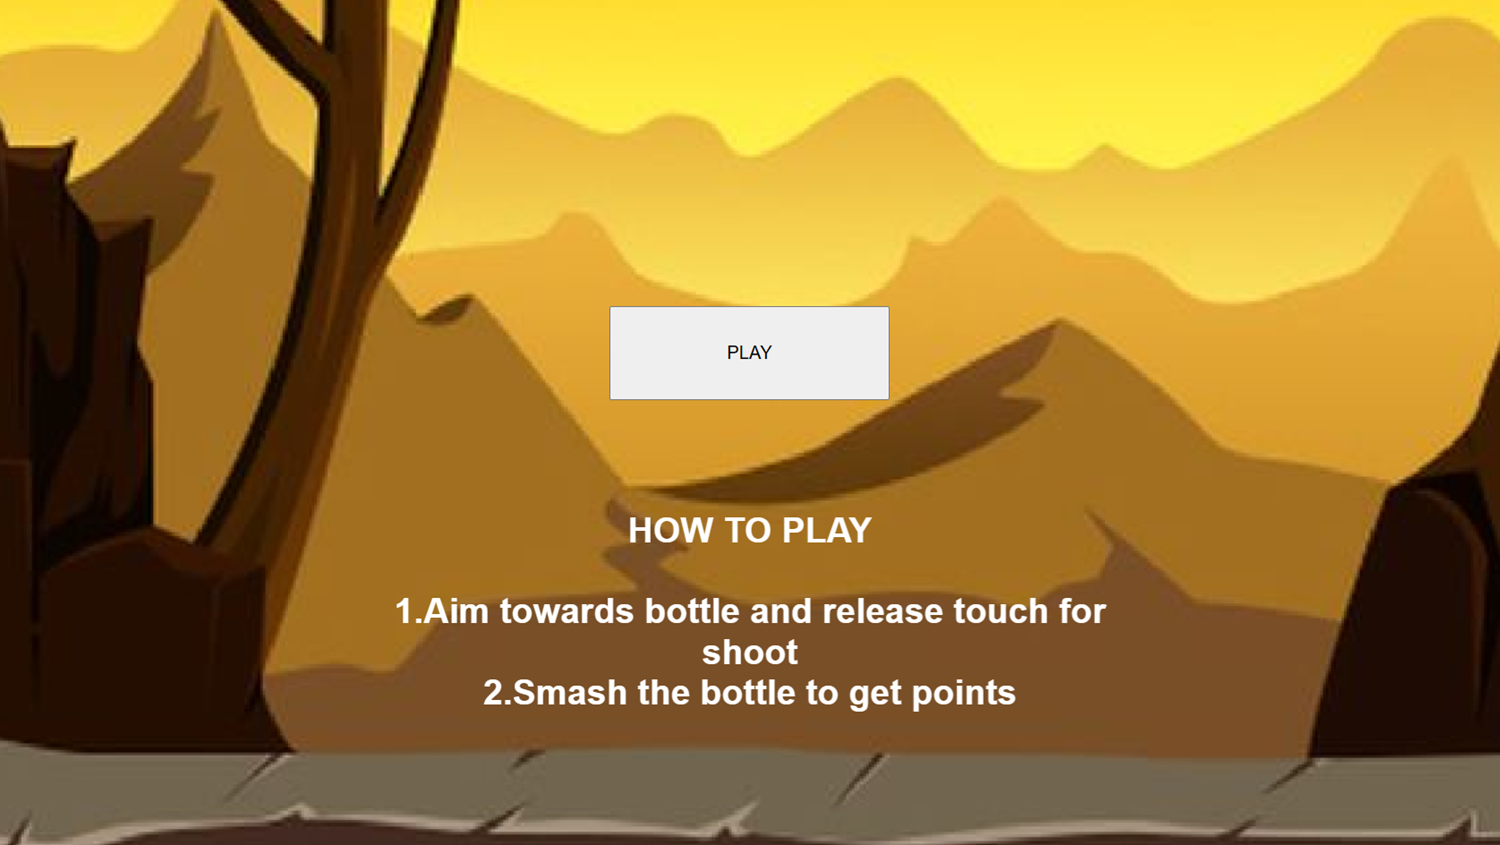 Bottle Smash Game How To Play Screenshot.